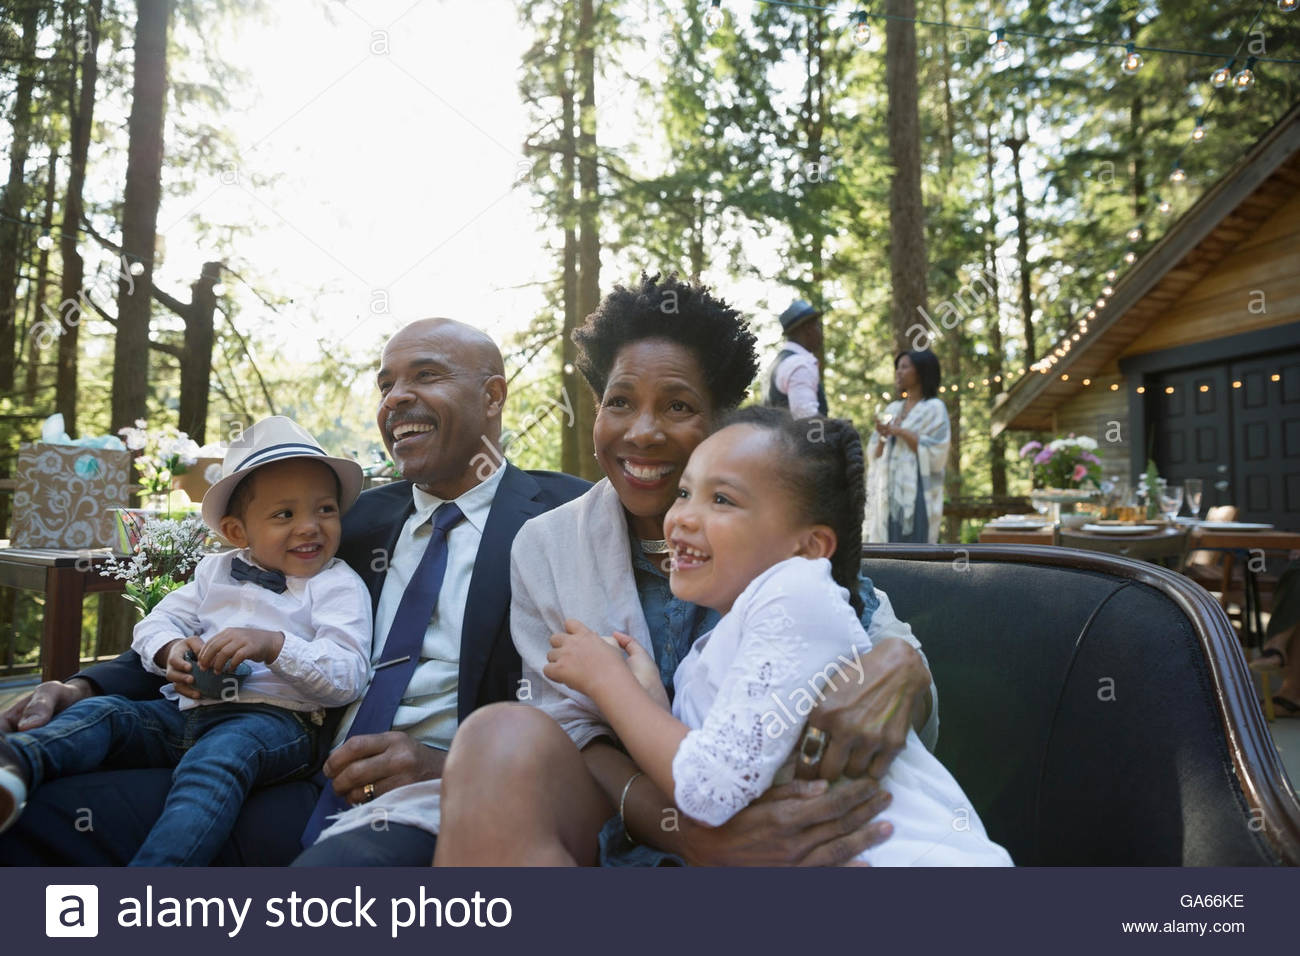 Smiling grandparents with grandchildren at party on balcony in woods Stock Photo